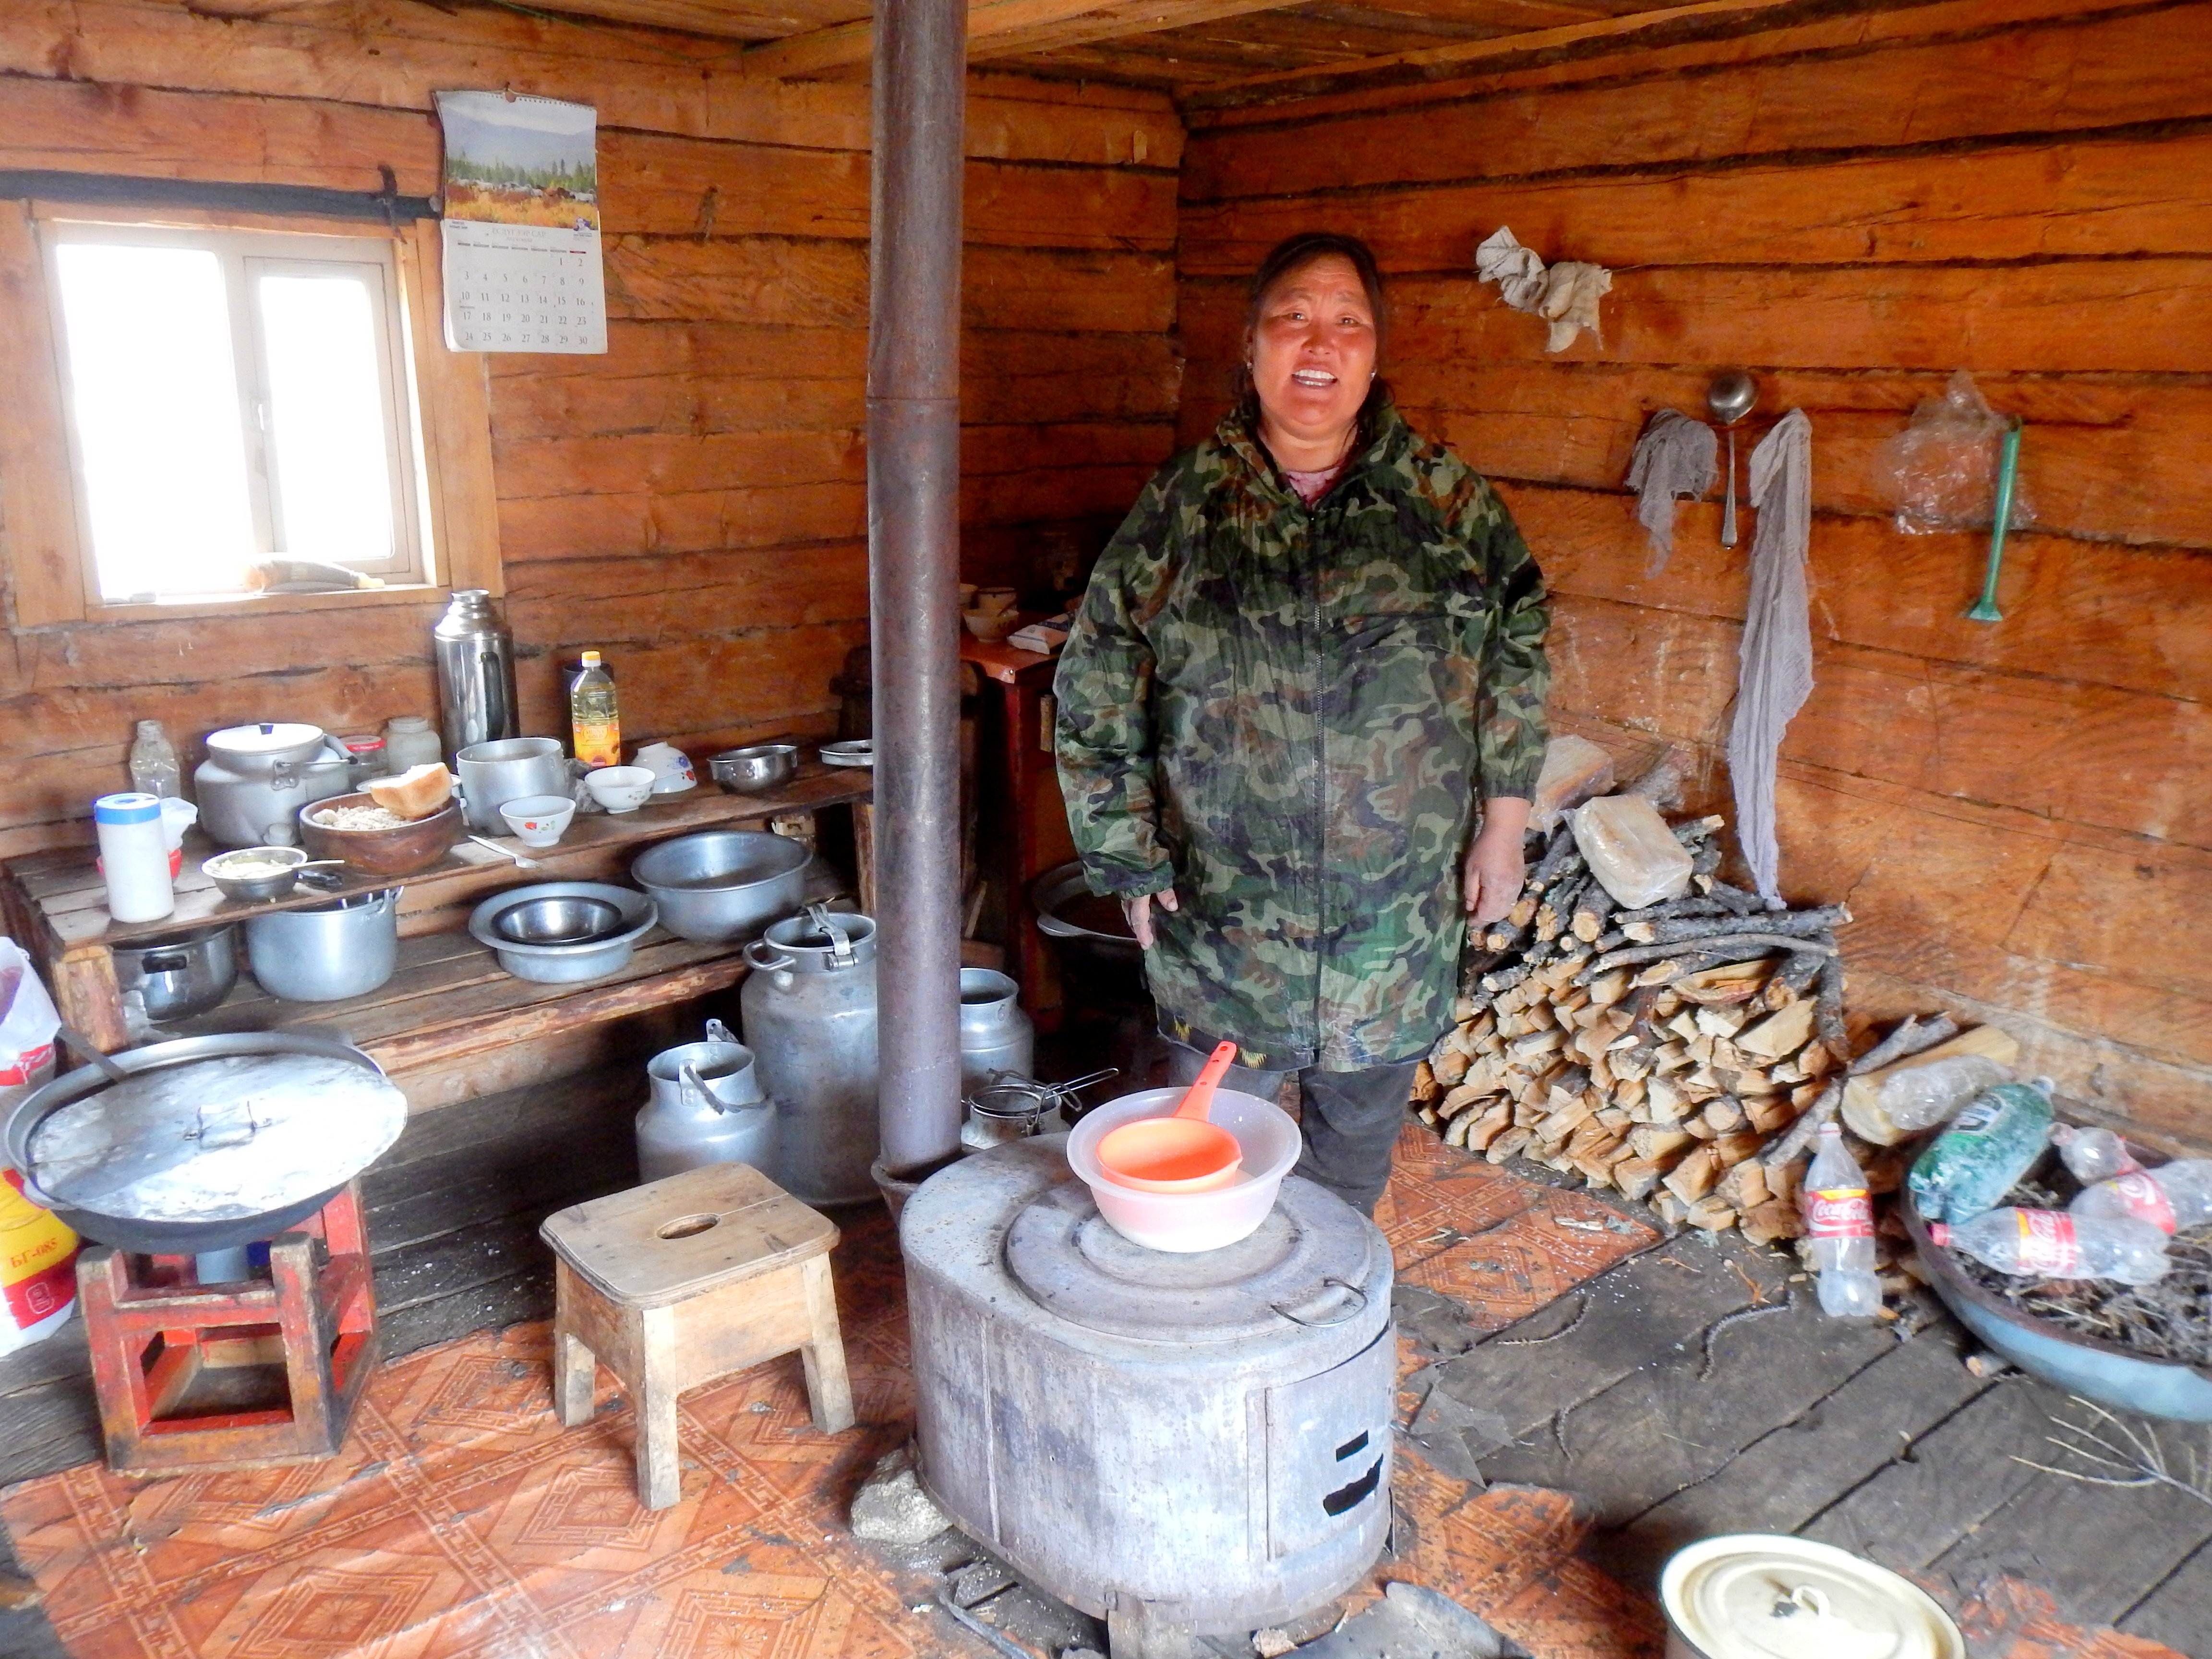 Ut in her home, northern Mongolia